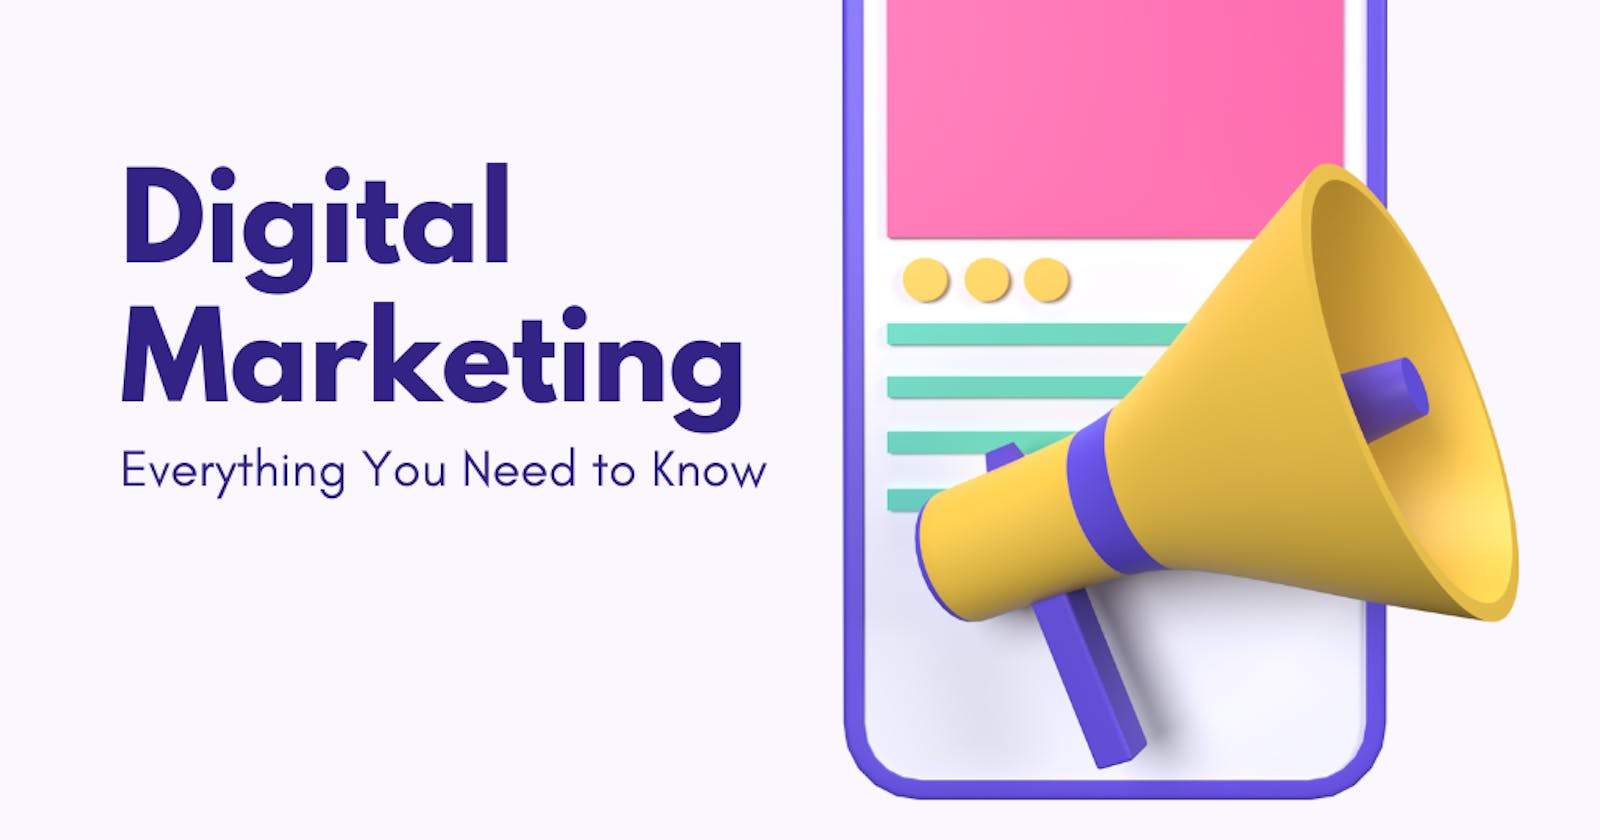 Digital Marketing: Everything You Need to Know